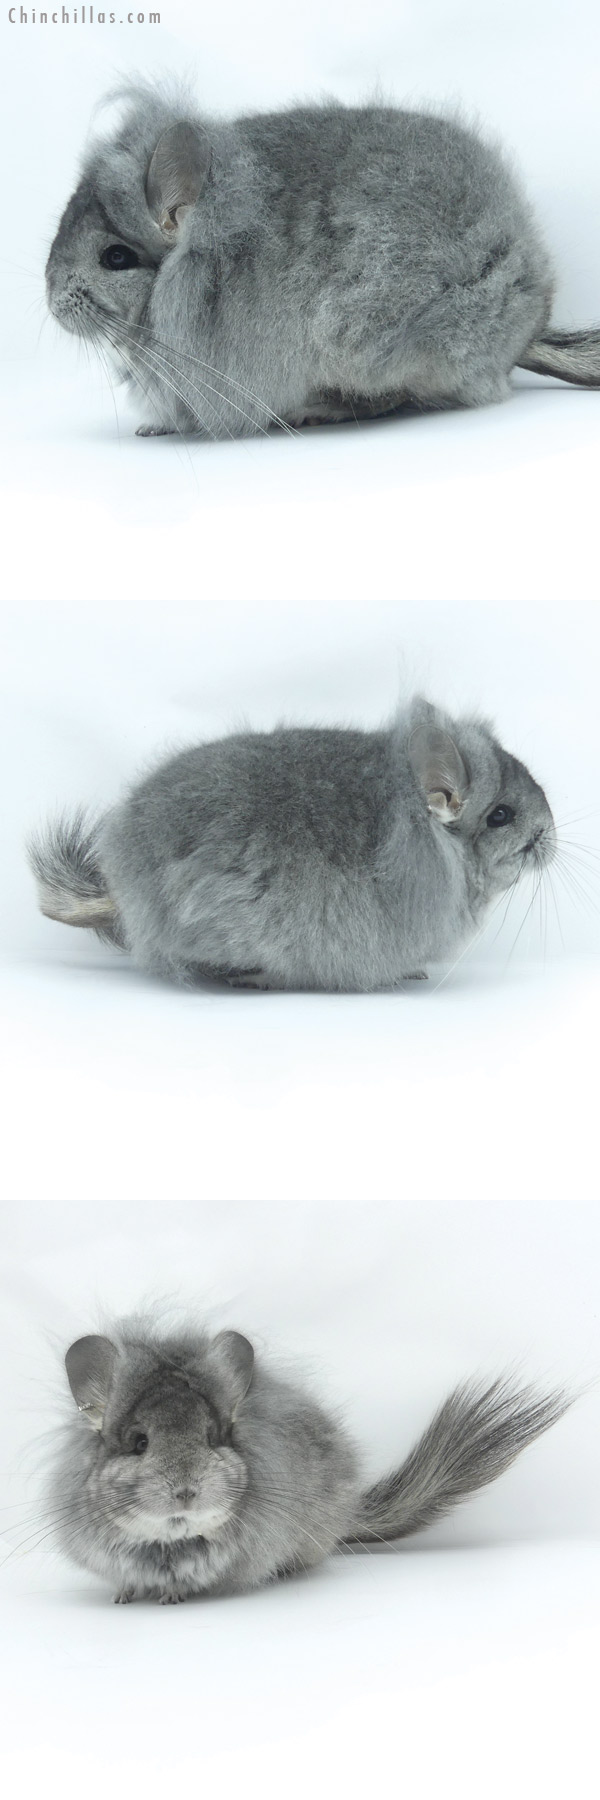 Chinchilla or related item offered for sale or export on Chinchillas.com - 19447 Exceptional Standard G3  Royal Persian Angora Female Chinchilla